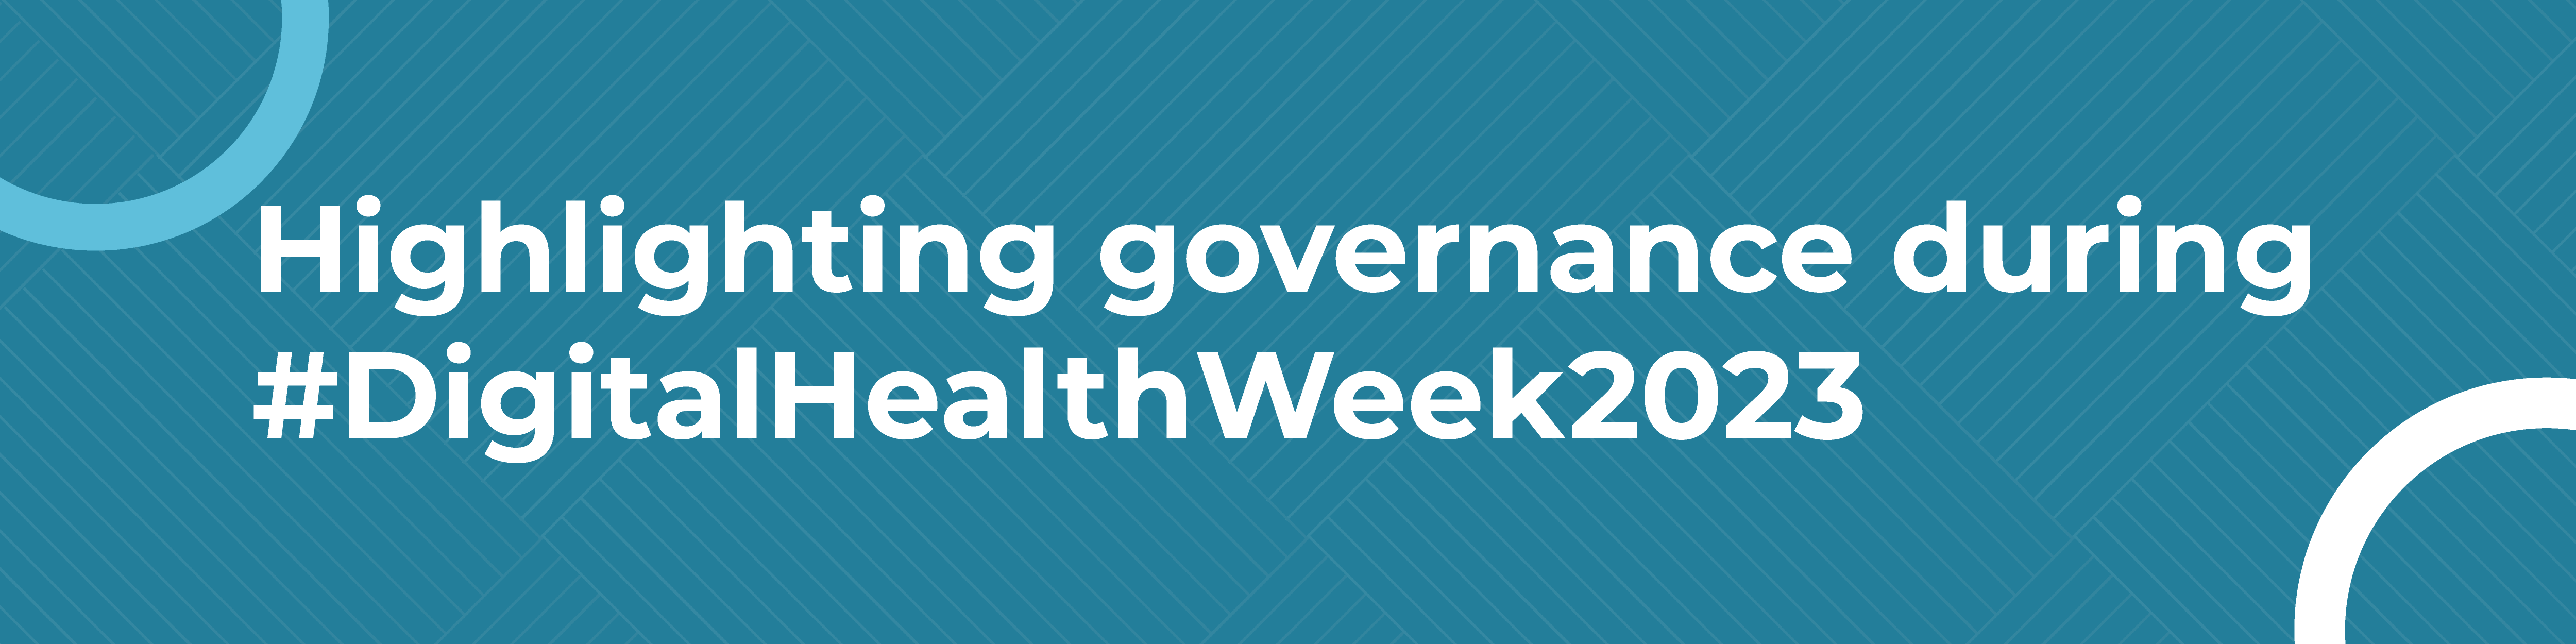 A banner with a blue background reads: Highlighting governance during #DigitalHealthWeek2023